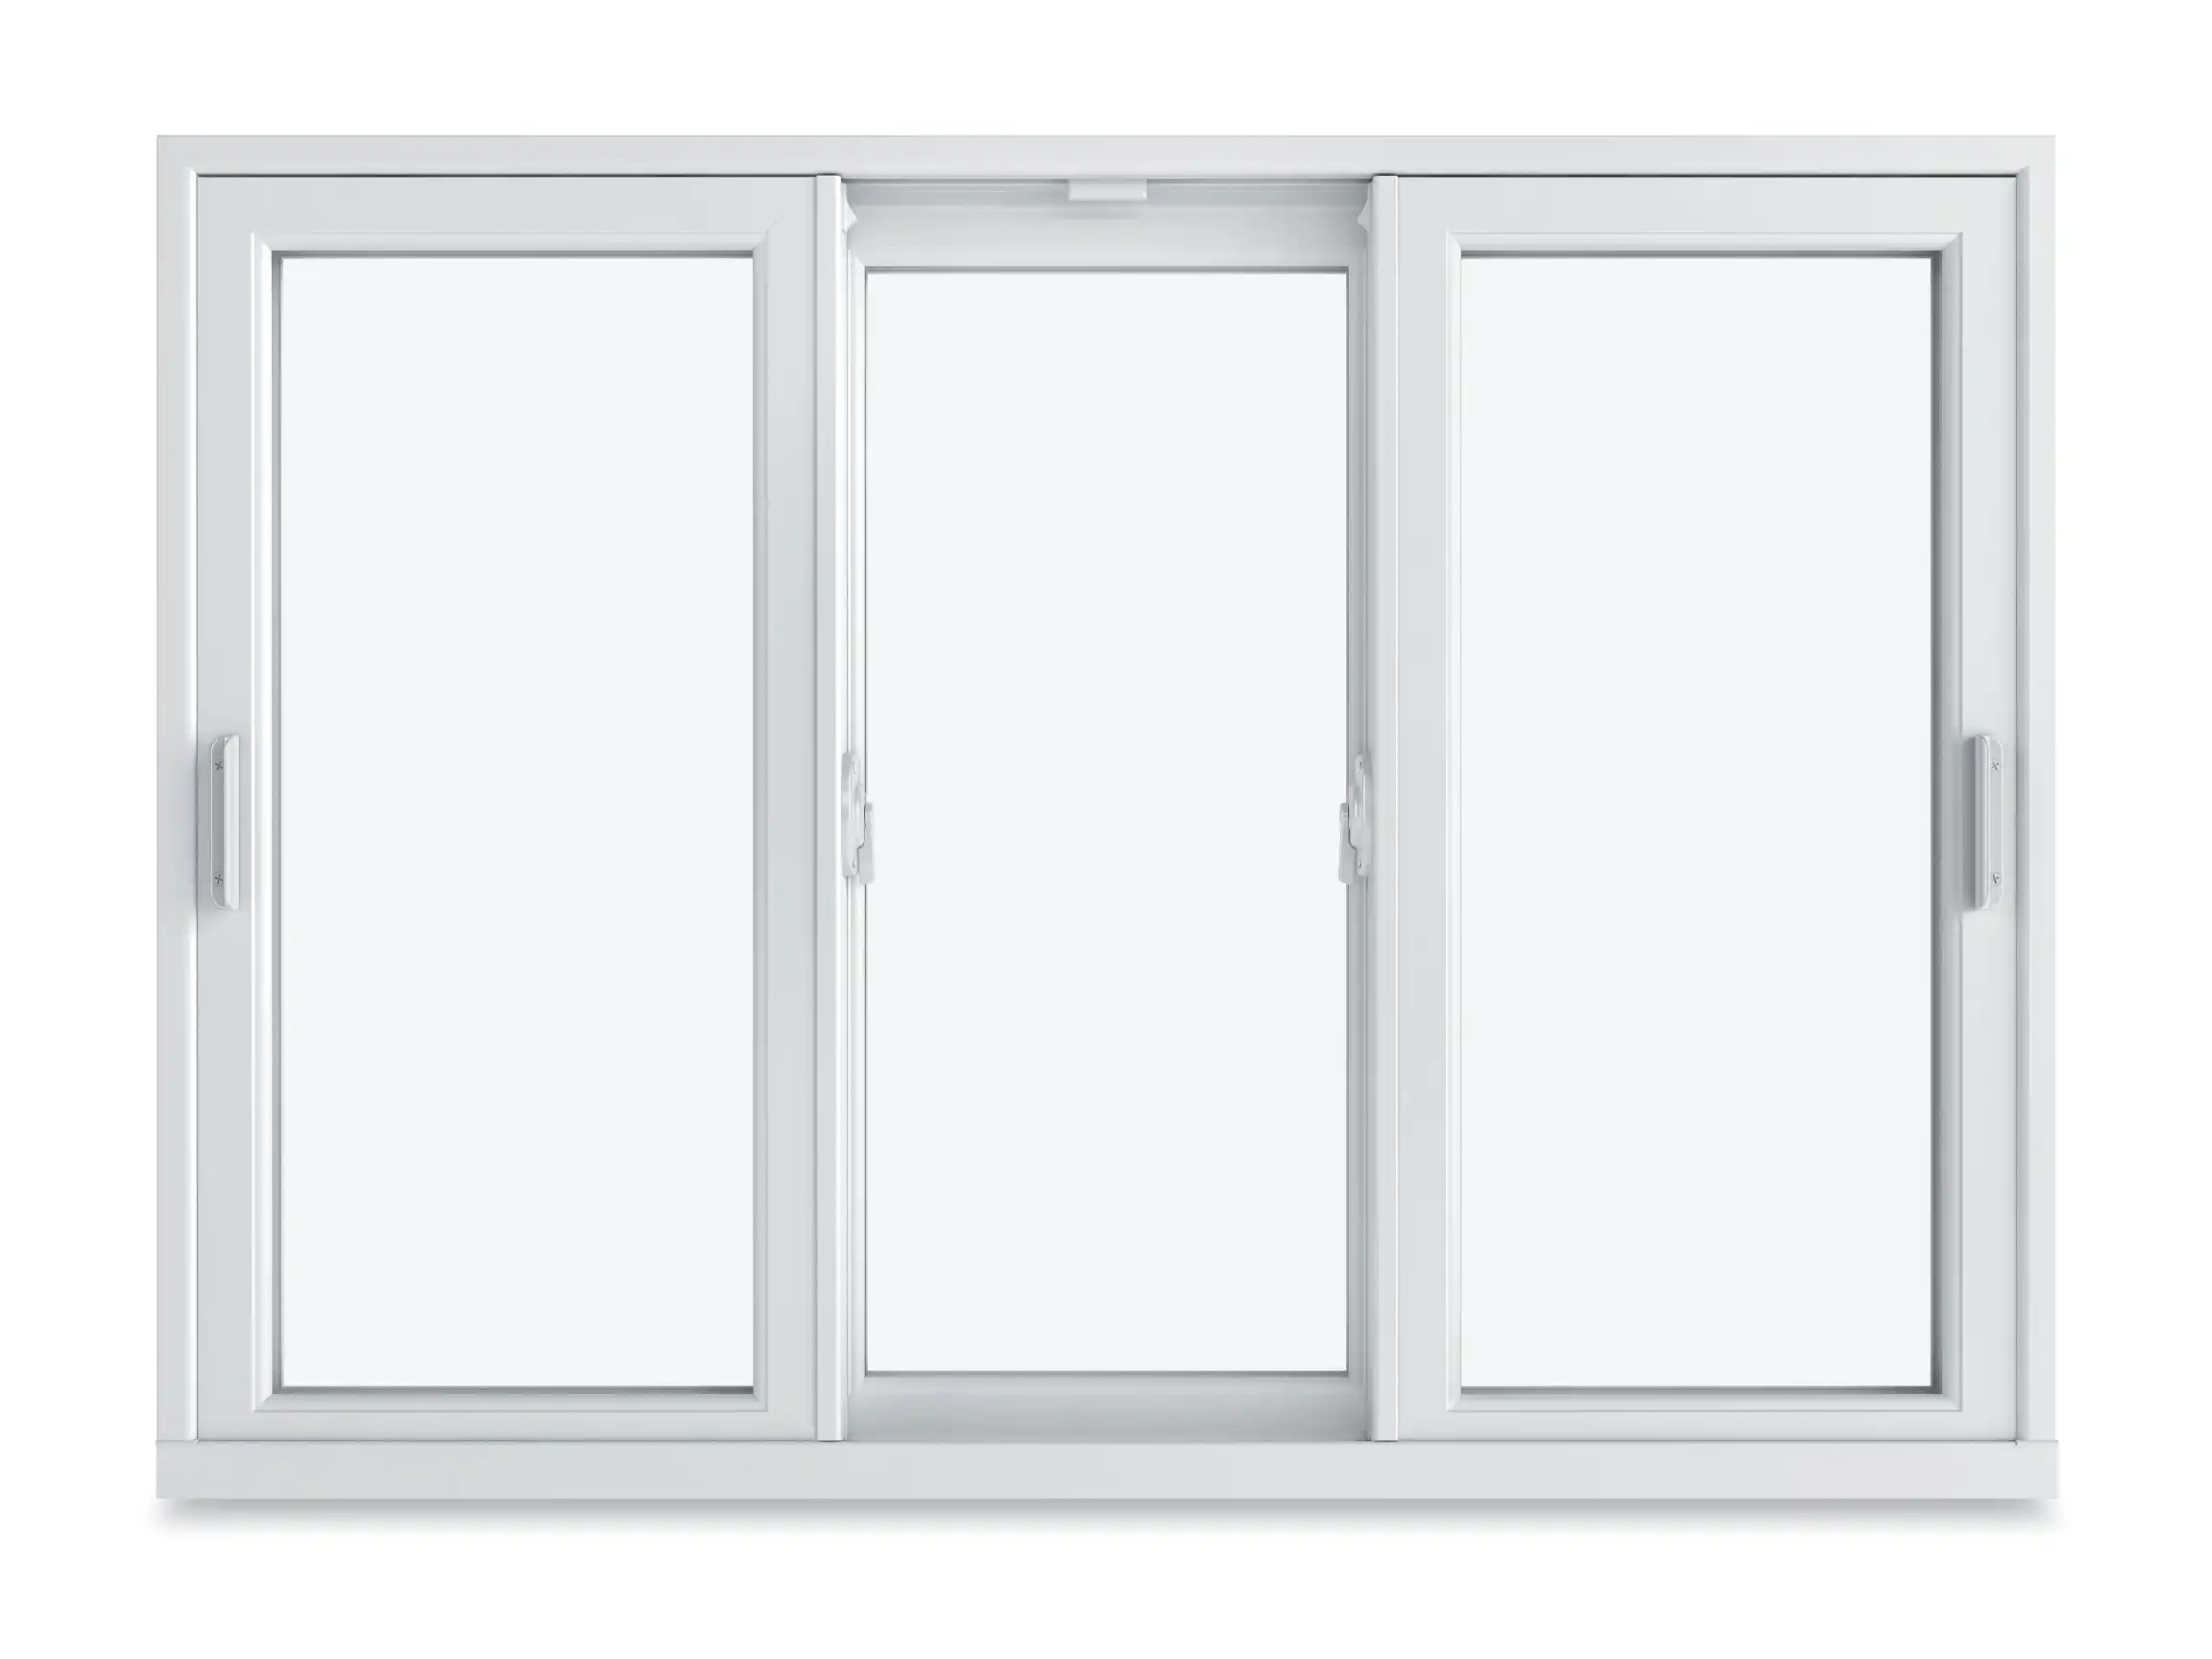 Image of a Marvin Replacement Slider window with three equal size sash.